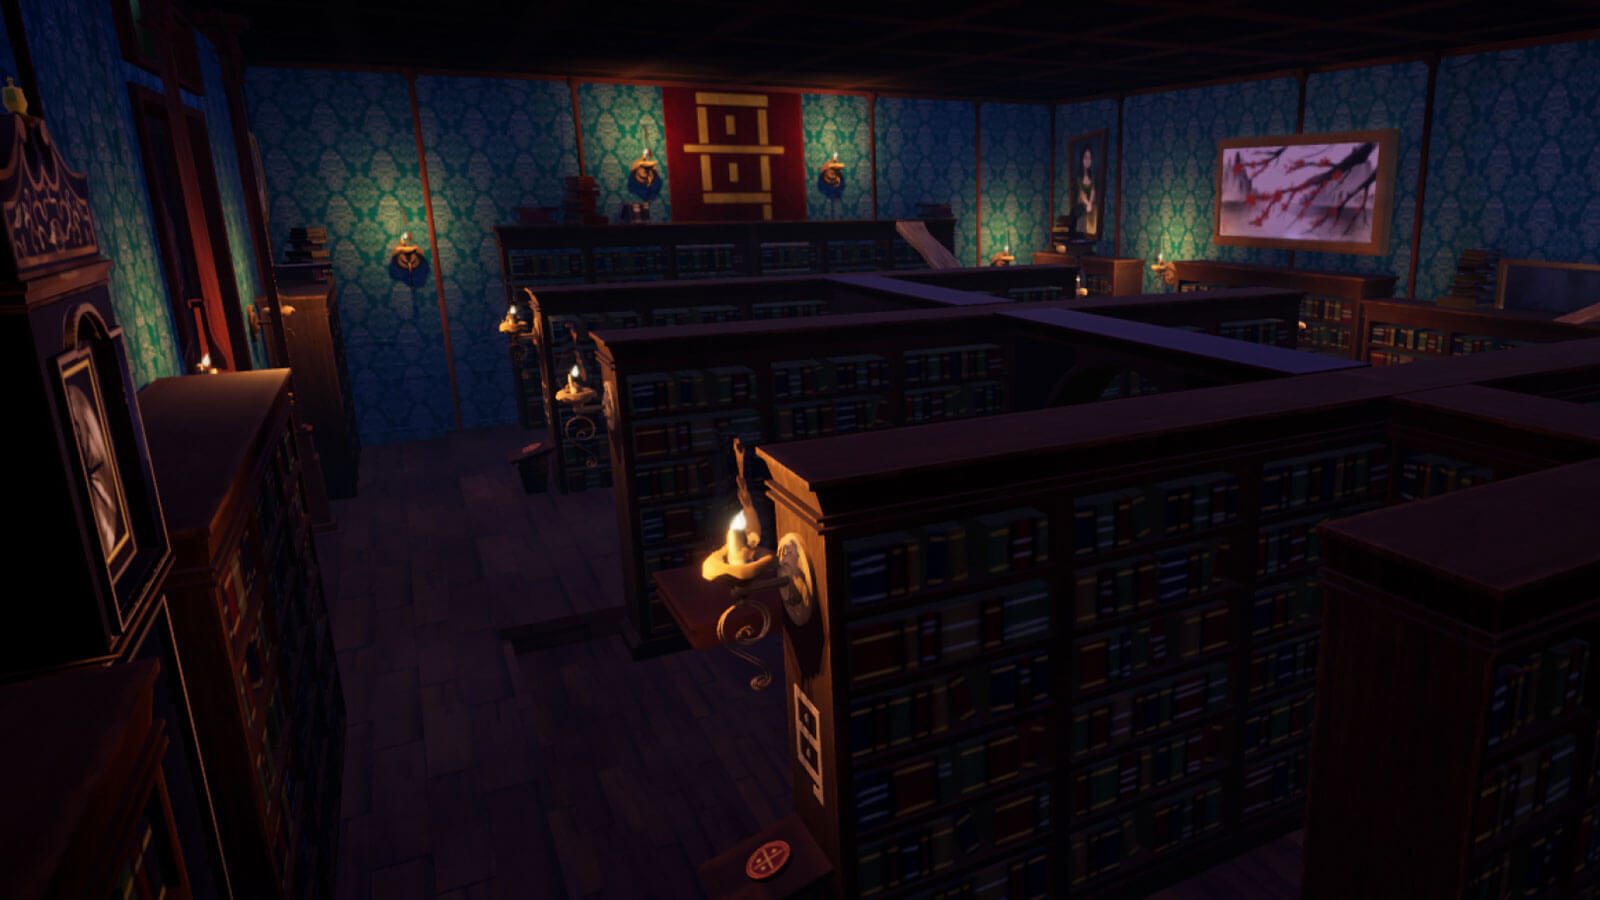 A candlelit library